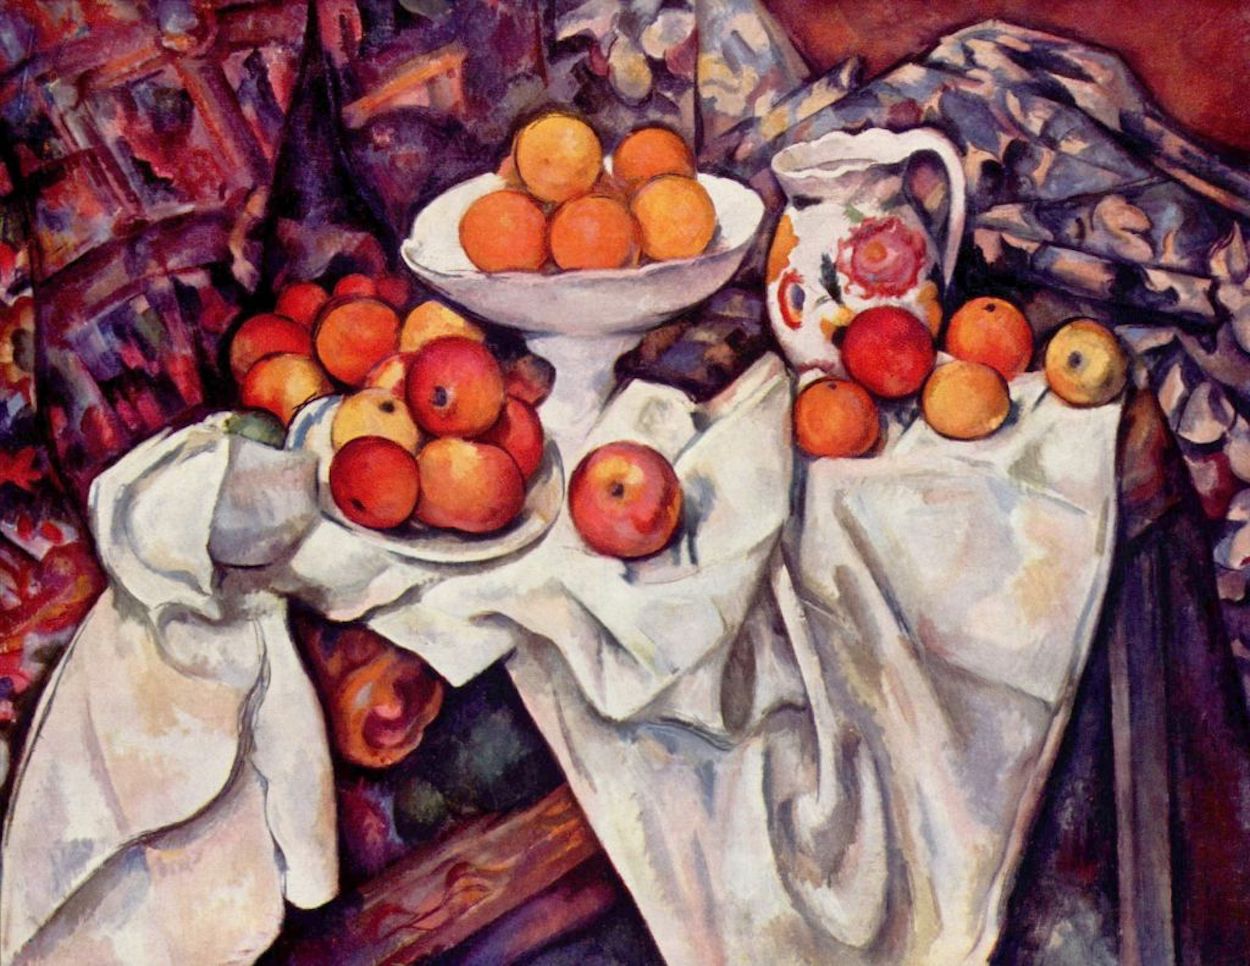 Still Life with Apples and Oranges by Paul Cézanne - 1895-1900 - 73 × 92 cm Musée d'Orsay